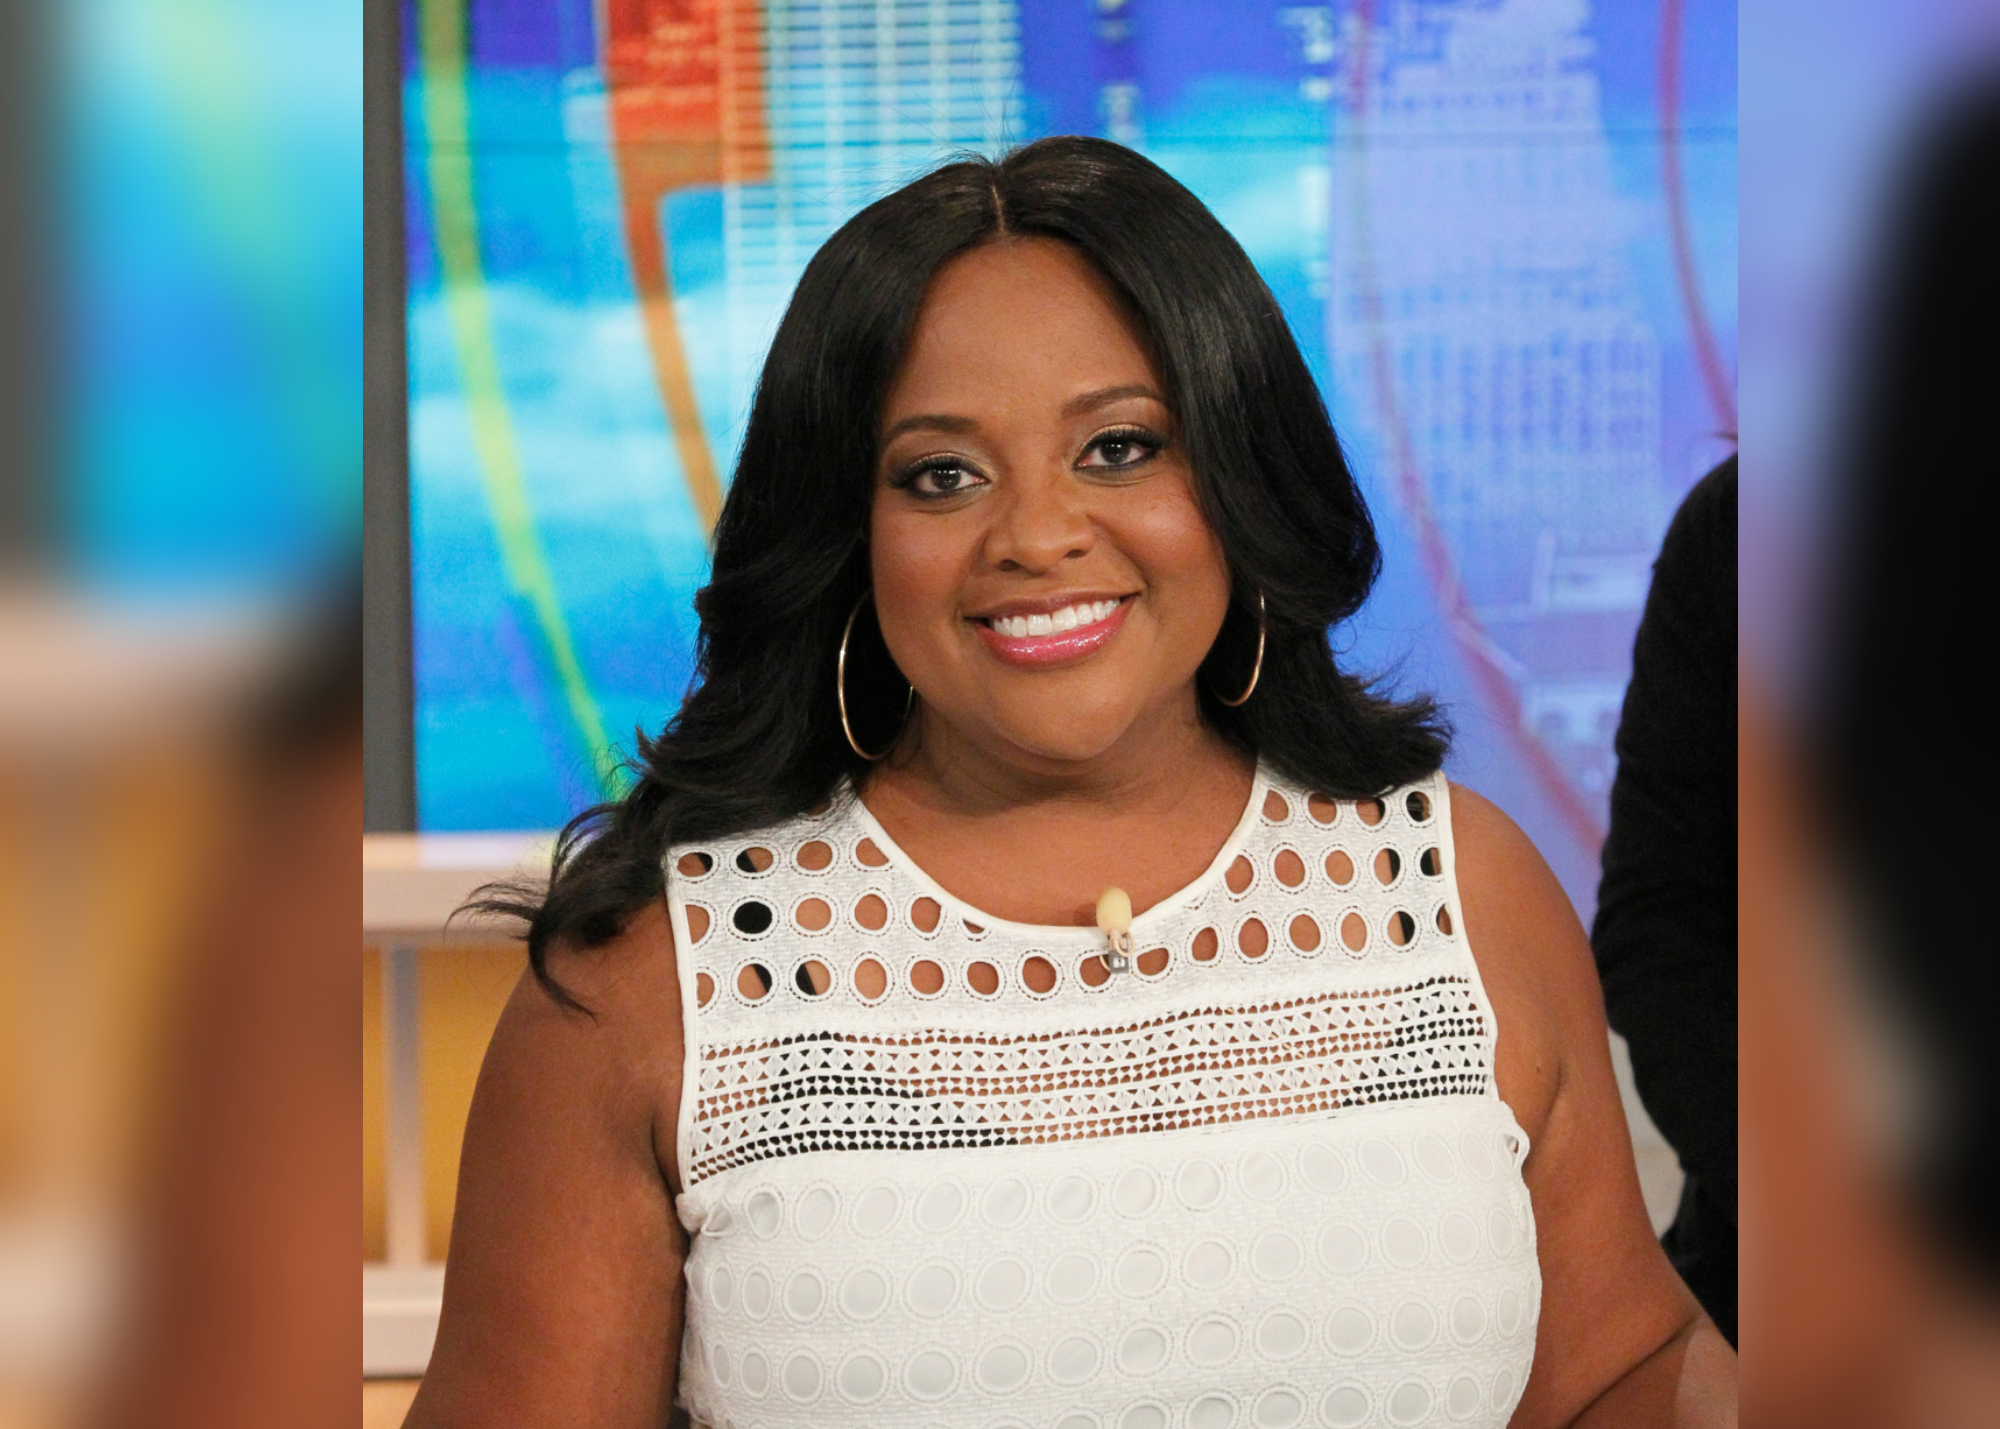 Sherri Shepherd Officially Joins Fox’s “Dish Nation” As A Permanent Co-Host